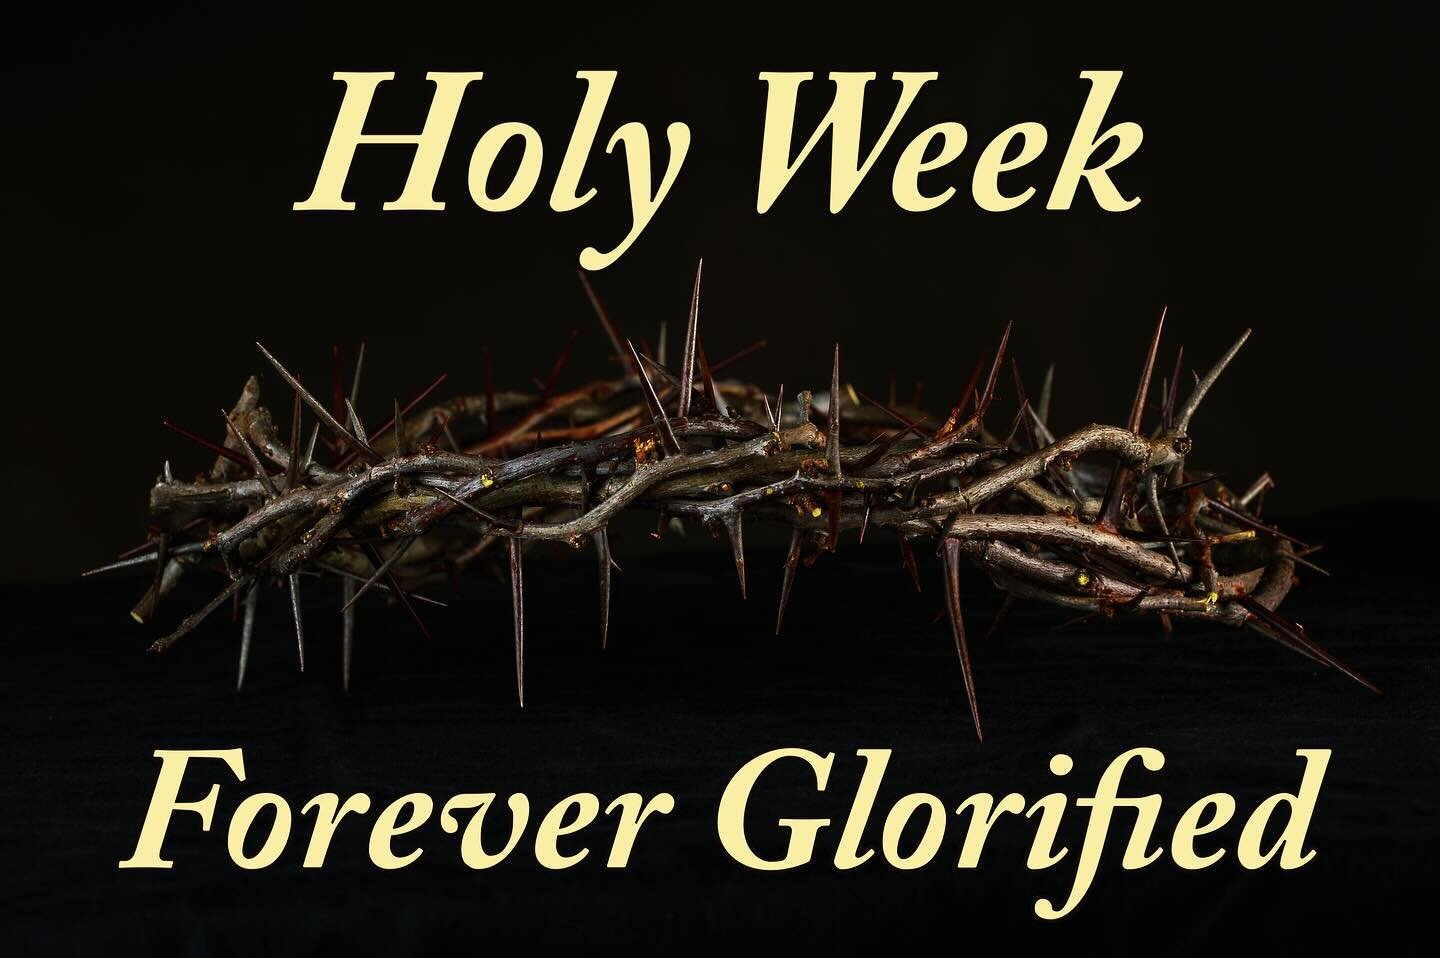 Today begins Holy Week.  We will gather in person and take time to look at Jesus&rsquo; last week accomplishing what the Father sent Him to do.